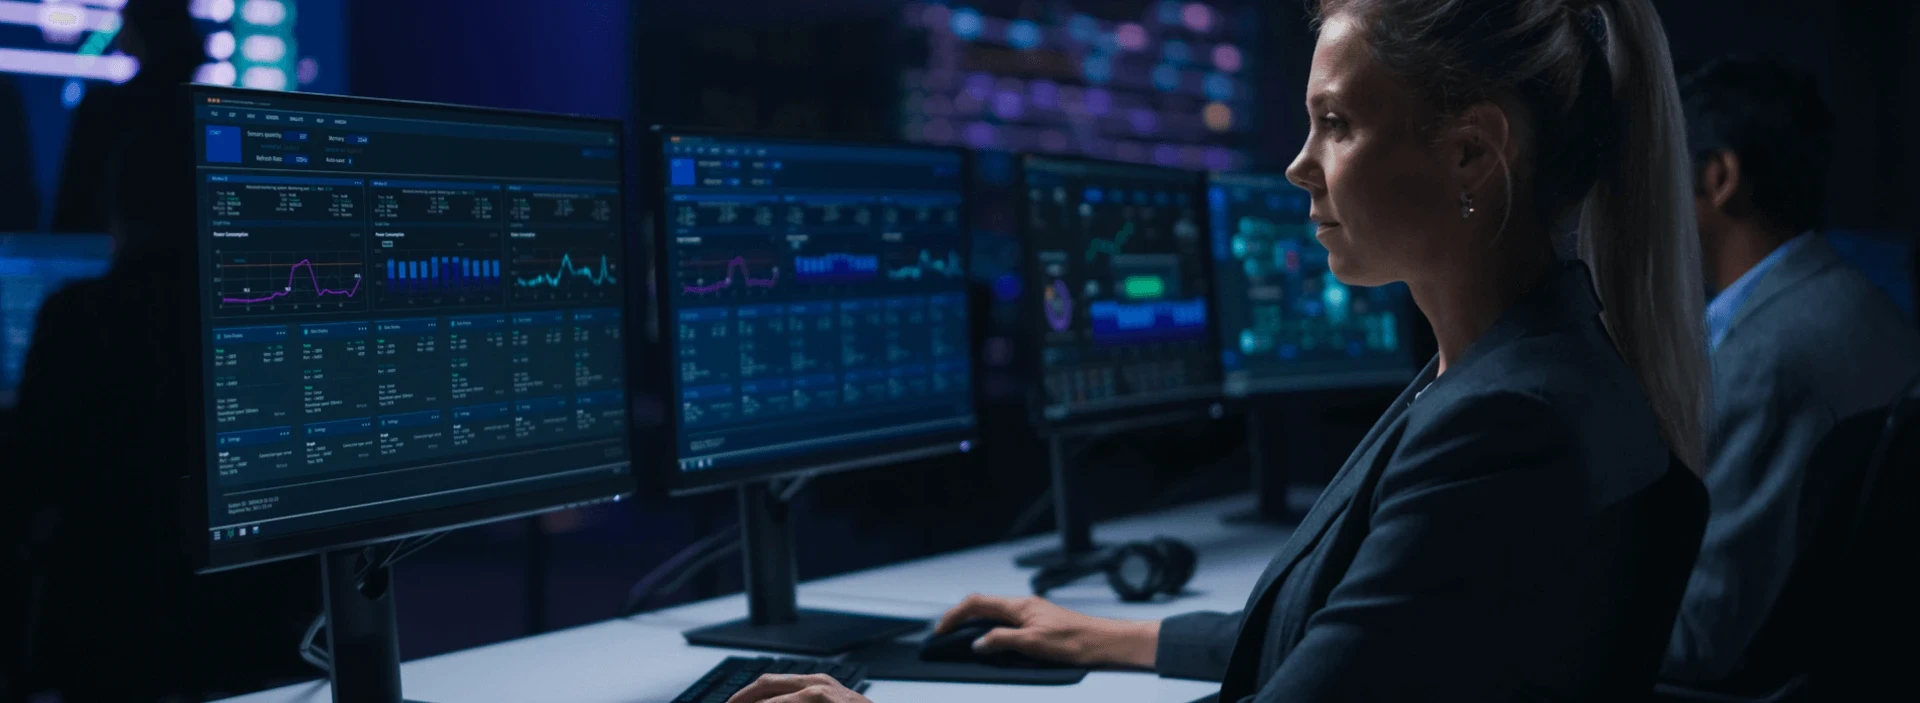 A woman sits in a control center, looking at performance data displayed on a row of computer monitors.